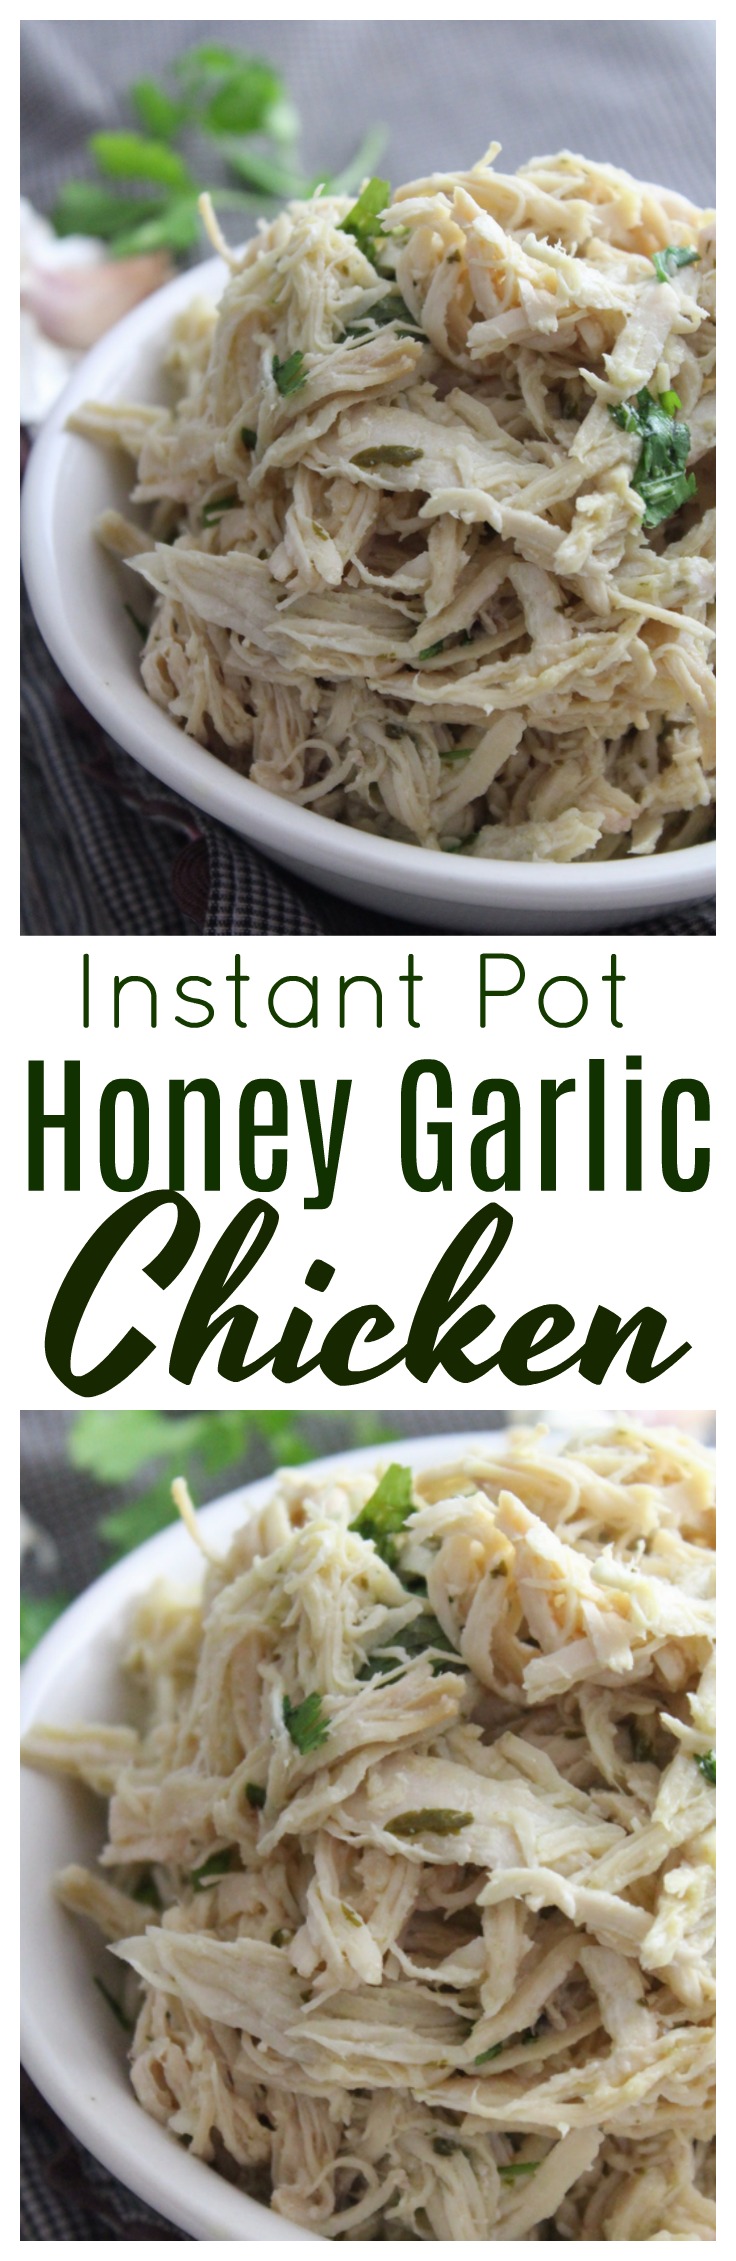 A delicious combination of honey, garlic and ginger gives just the right sweetness to this shredded chicken recipe, which is great over rice or to use as a filling for rolled tacos, burritos and more.